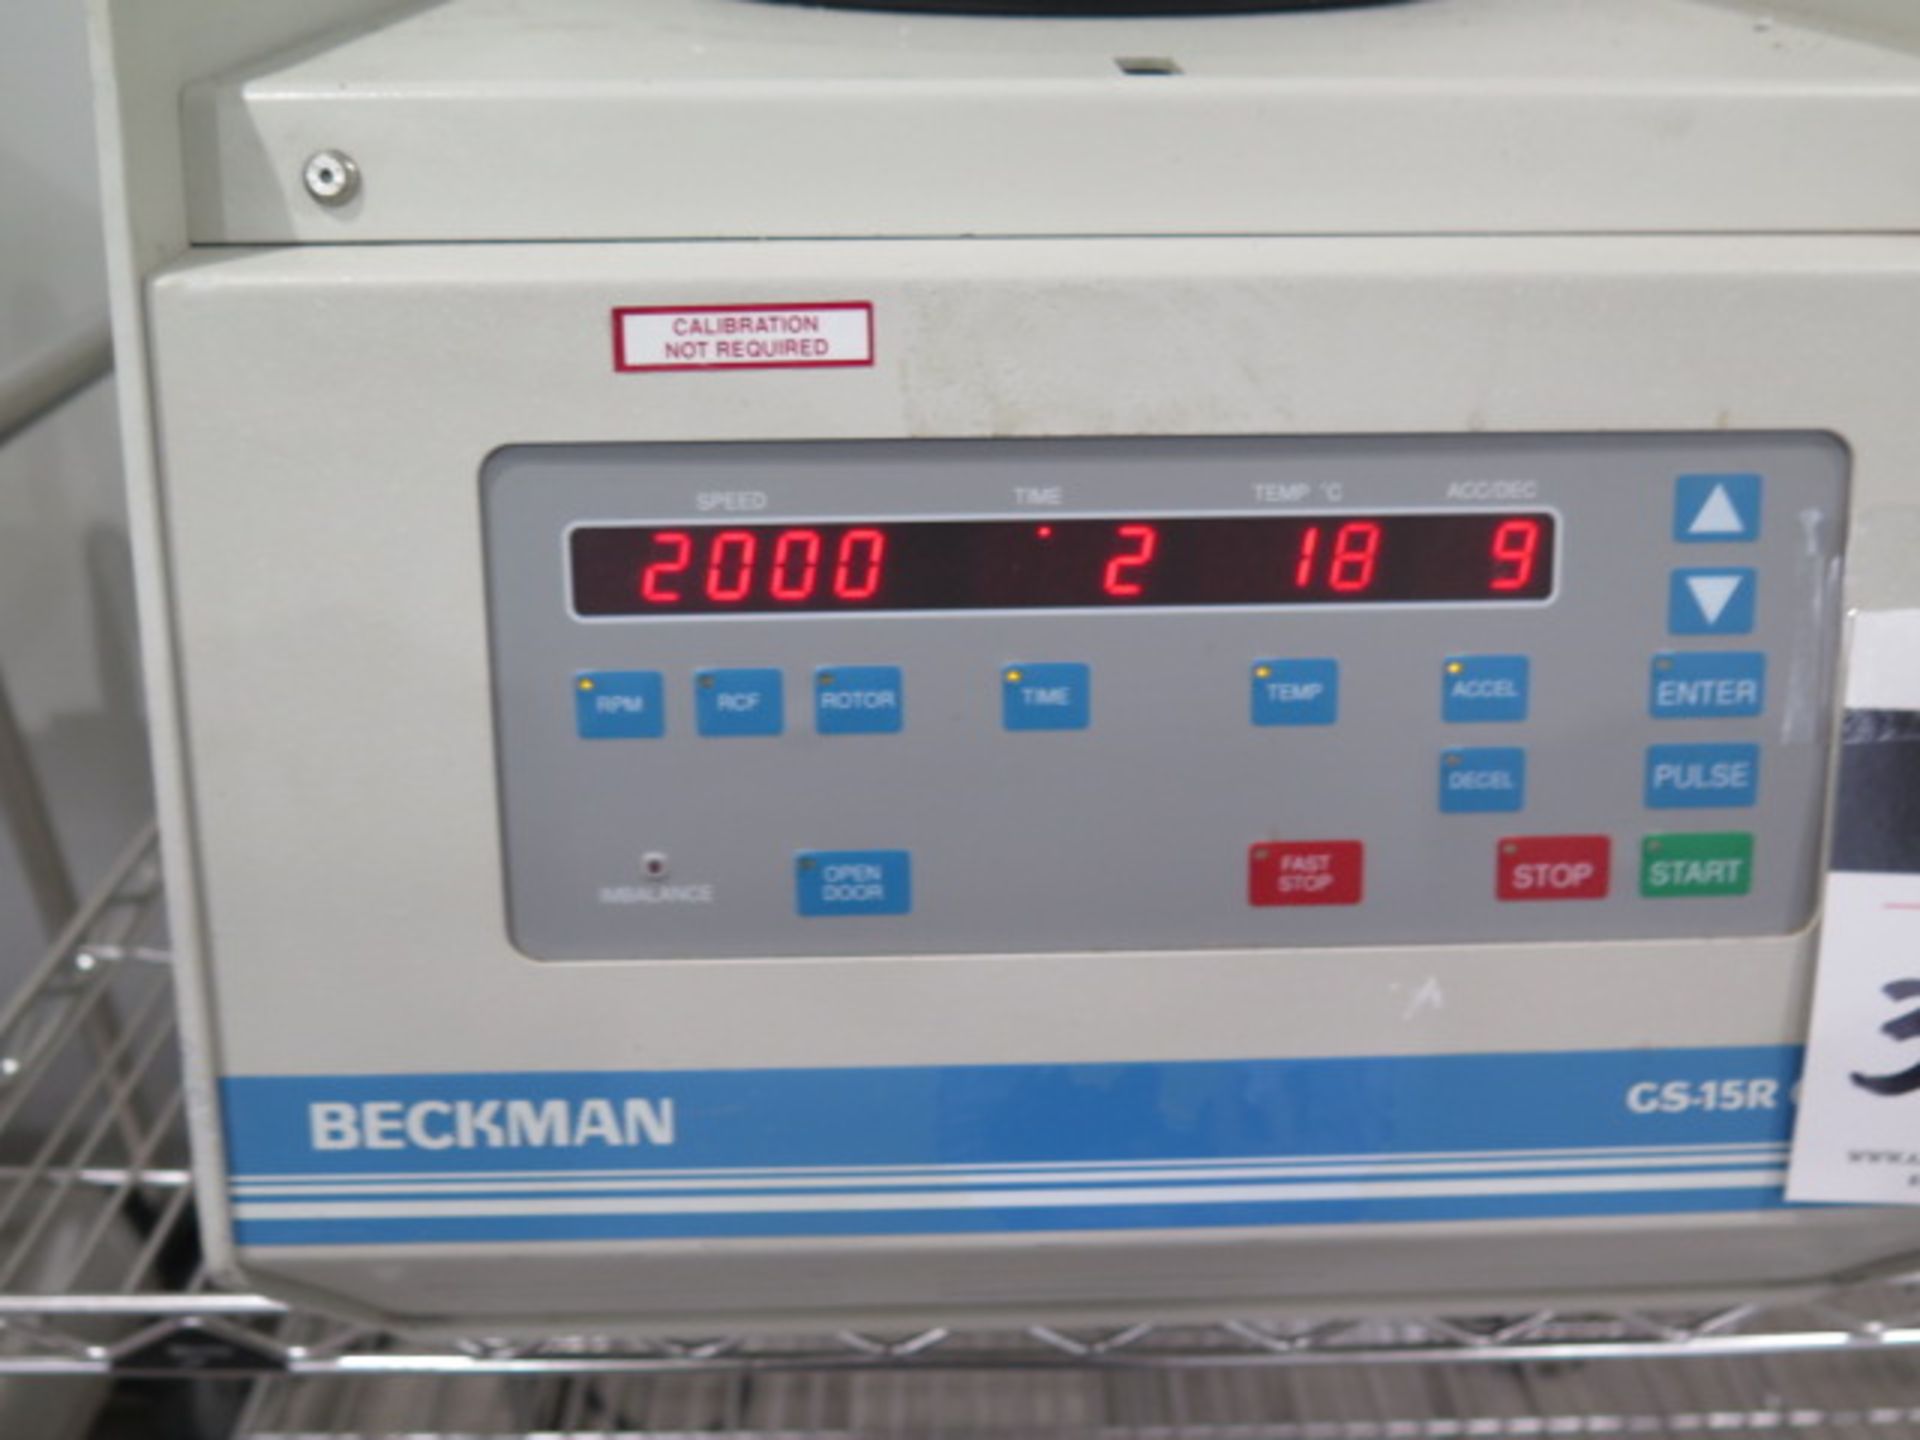 Beckman GS-15R Refrigerated Centrifuge s/n GGB96K01 (SOLD AS-IS - NO WARRANTY) - Image 6 of 9